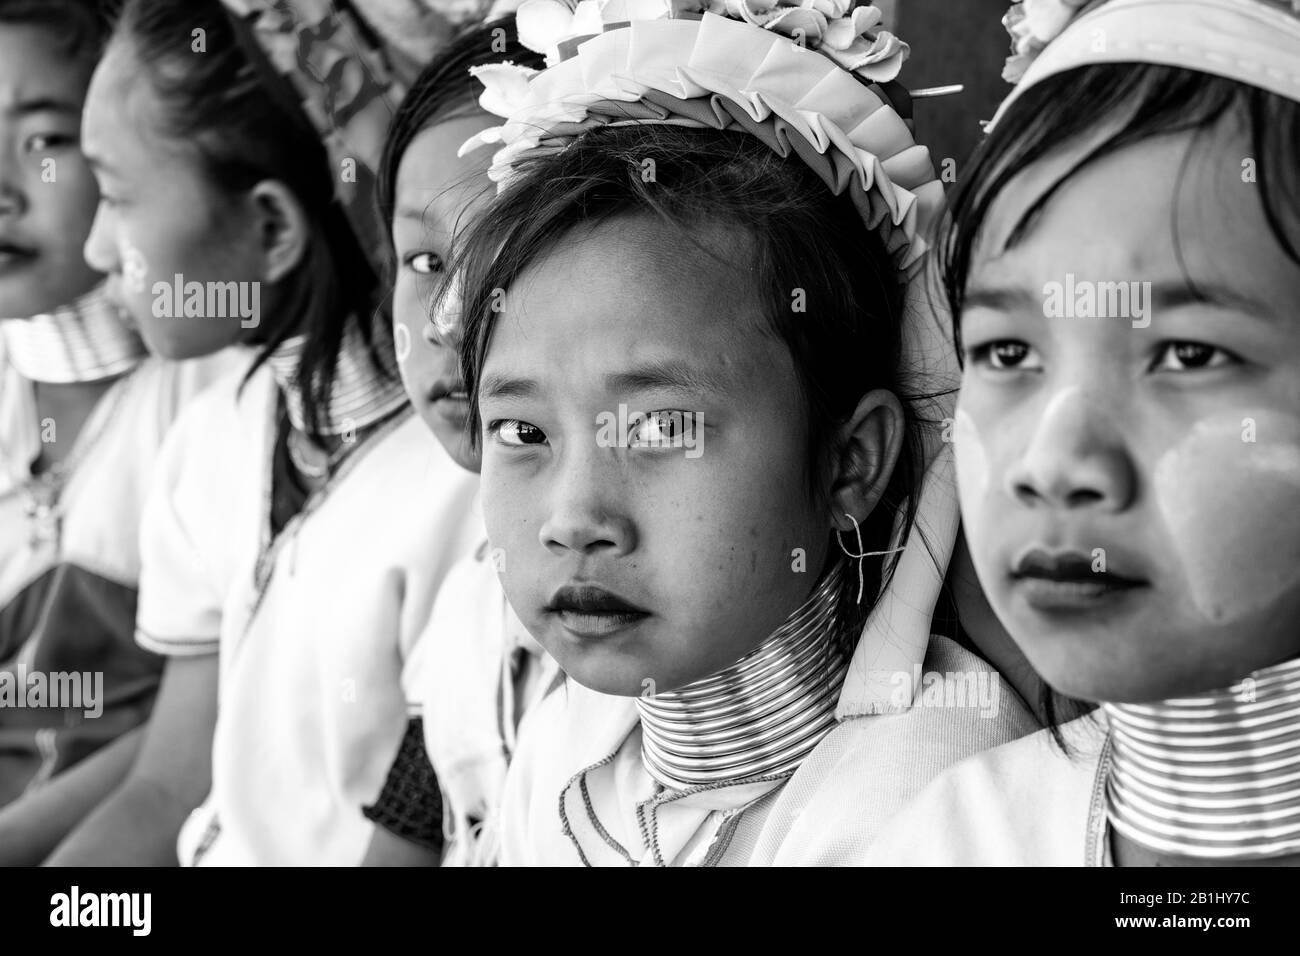 A Group Of Children From The Kayan (Long Neck) Minority Group In Traditional Costume, Pan Pet Village, Loikaw, Kayah State, Myanmar. Stock Photo